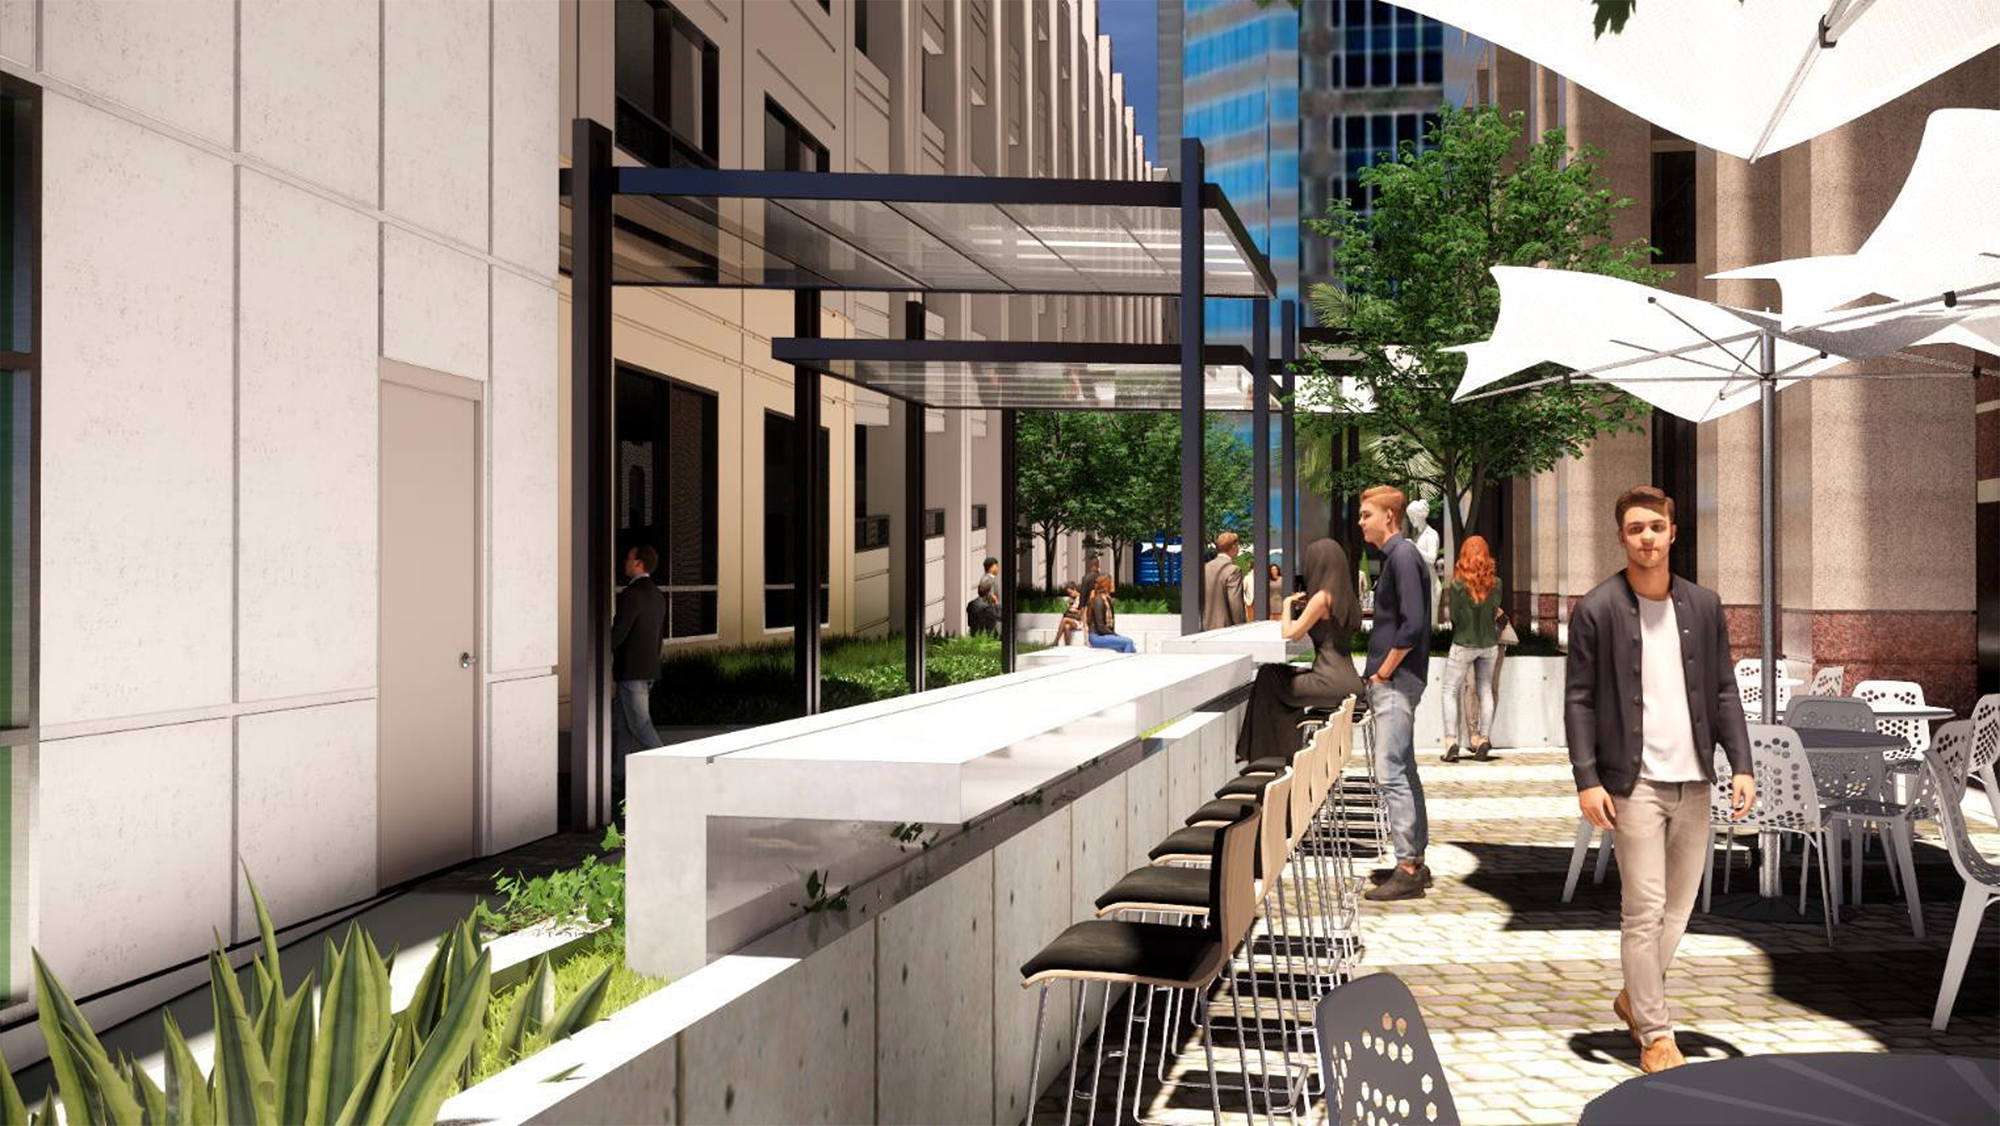 The breezeway will replace the existing alley between the garage and the buildings. The VyStar building at 100 W. Bay St. also will have The Bread & Board restaurant.